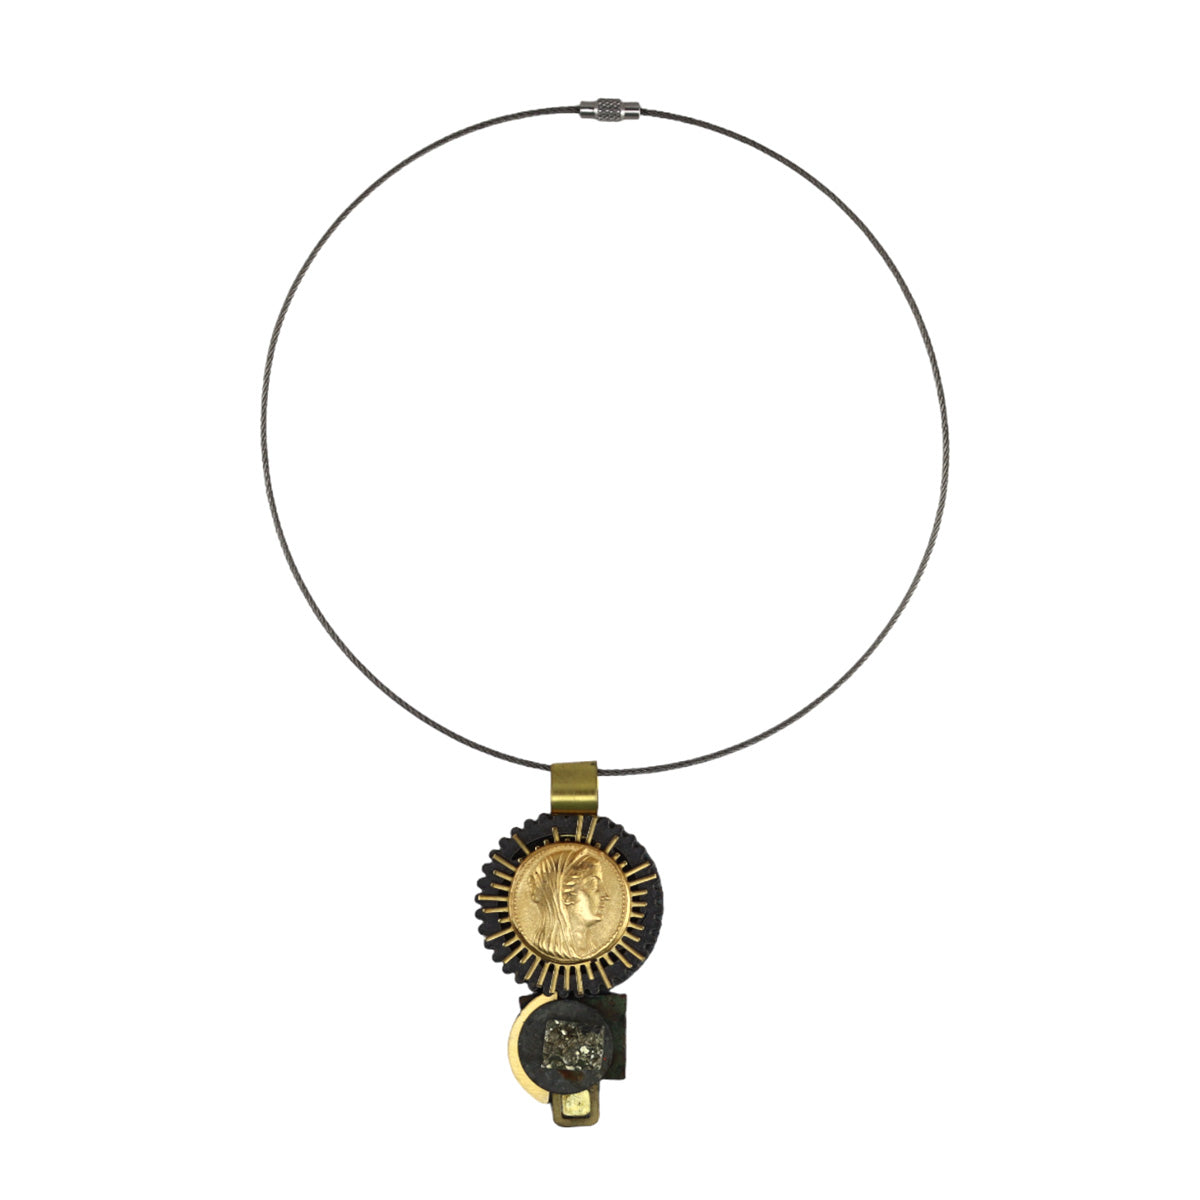 Shirley Wagner - "Gold Muse" 24K Gold Egyptian Replica Coin, Pyrite Druzy, Found Minerals, on Brass Bale with 18" Stainless Steel Cable Cord, 3.125" x 1.625" pendant (J92312A-1223-001)